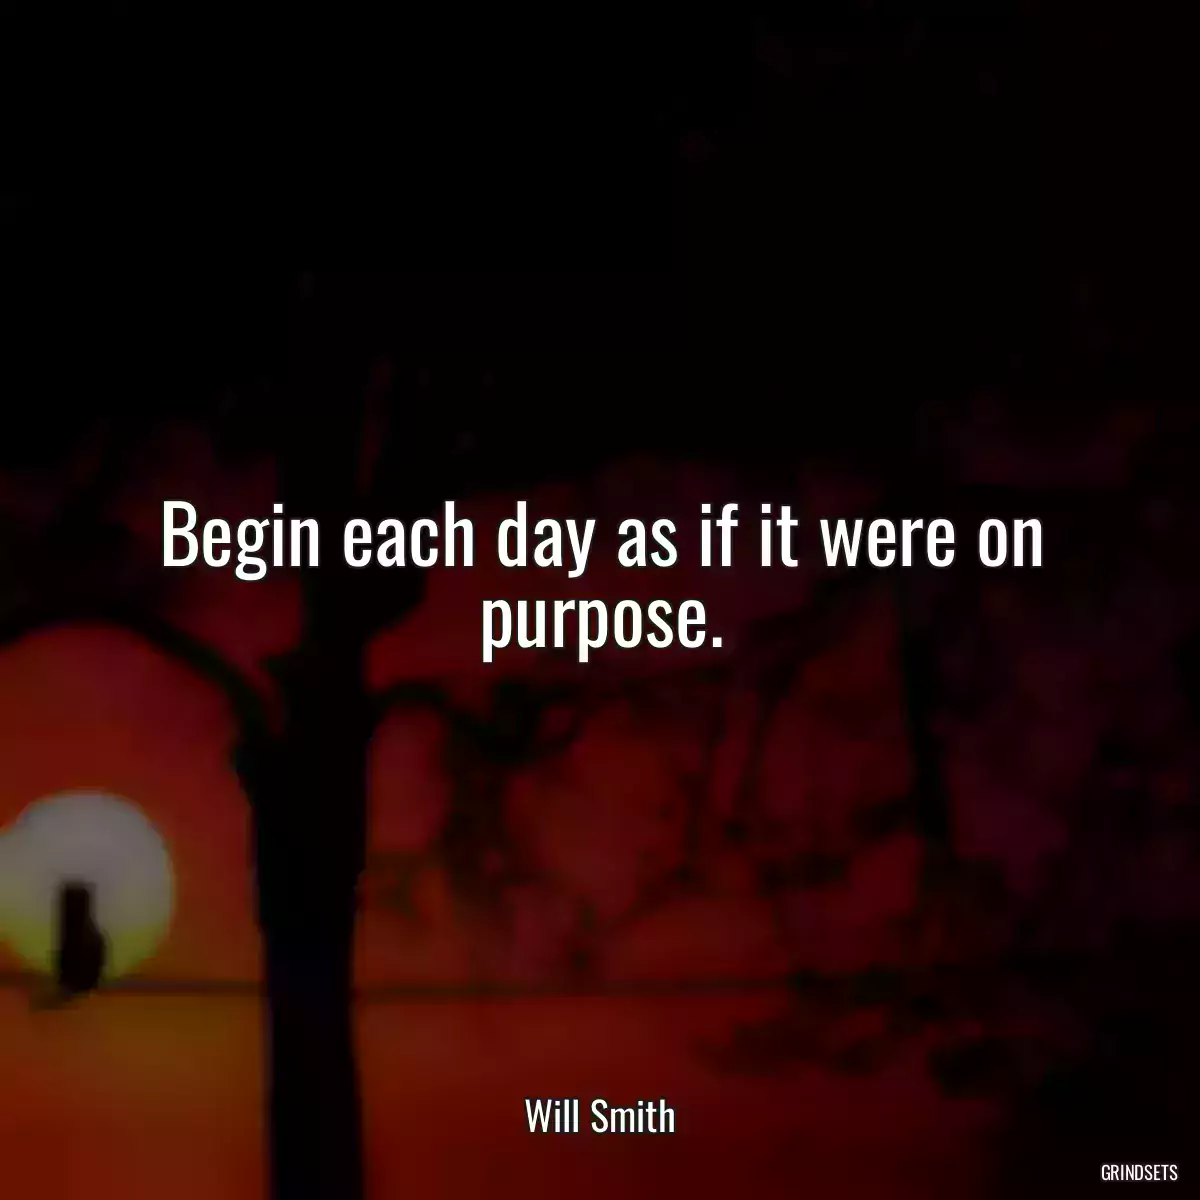 Begin each day as if it were on purpose.